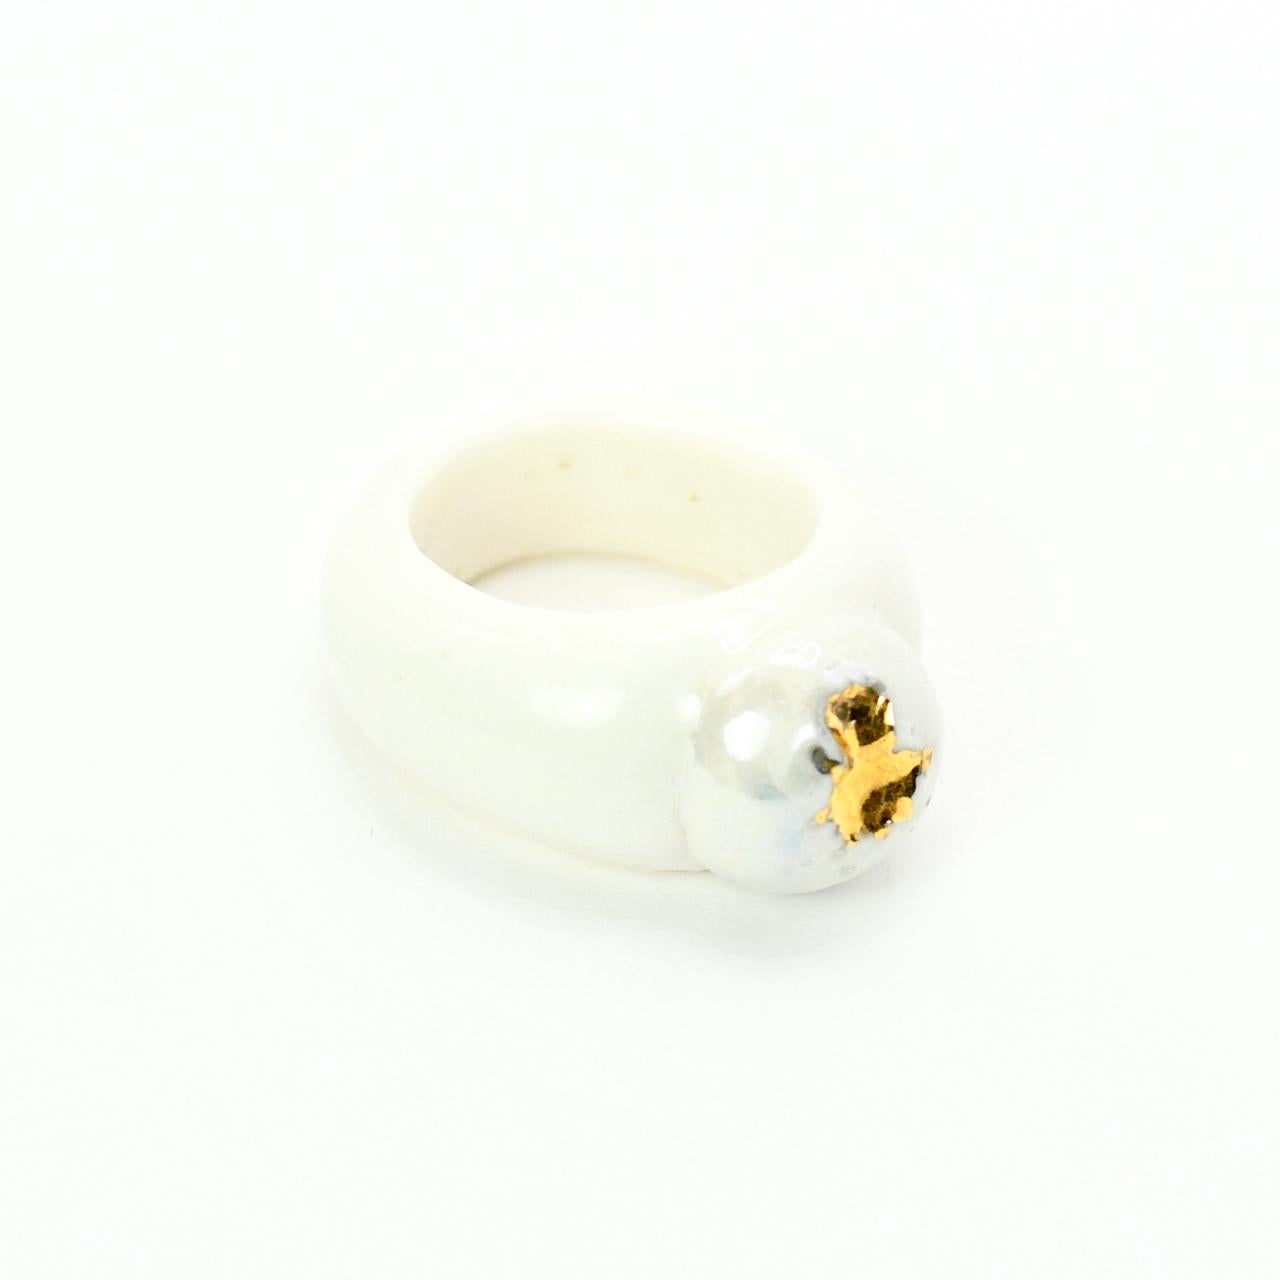 Porcelain  24K gold  Handmade in London 

Indulge in the beauty of the MACDUI Porcelain Ring. Handcrafted from the whitest porcelain, this gemstone-inspired ring exudes wearable art. Its marquise shape makes it truly one-of-a-kind, ensuring you'll